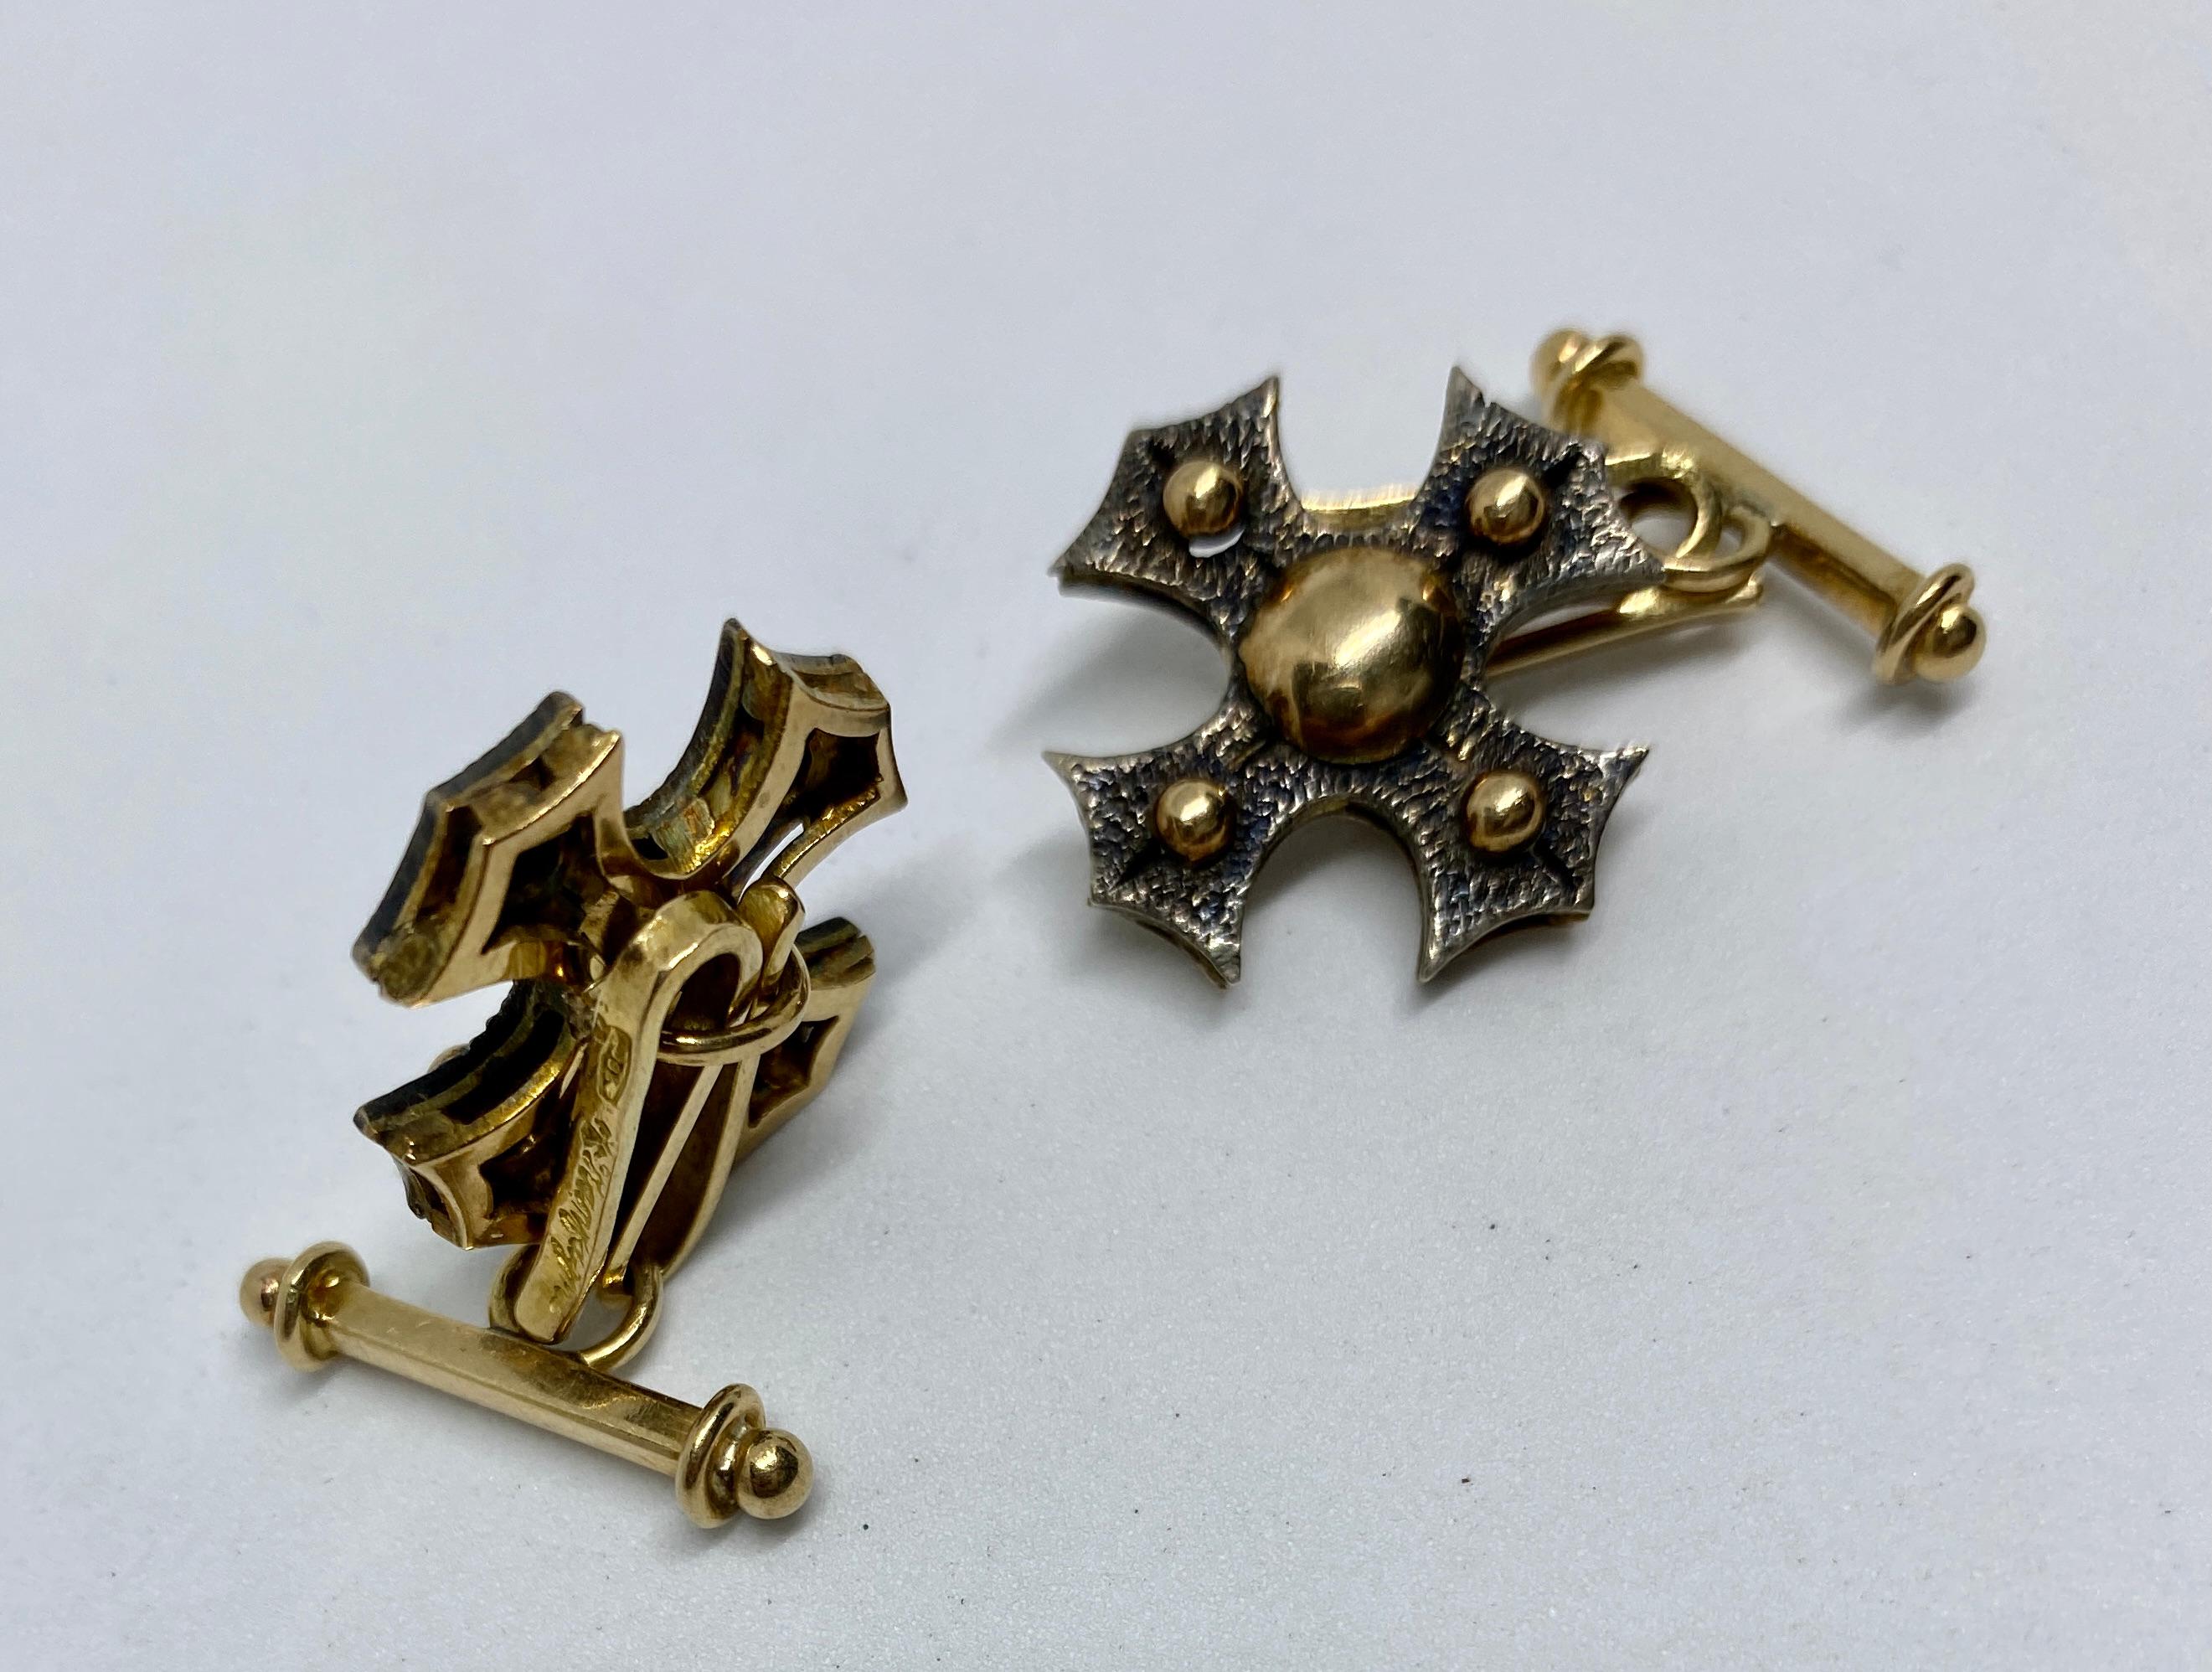 Handmade Cufflinks in 18k Gold with Hammered Silver Details by Ranfagni Firenze In Good Condition For Sale In San Rafael, CA